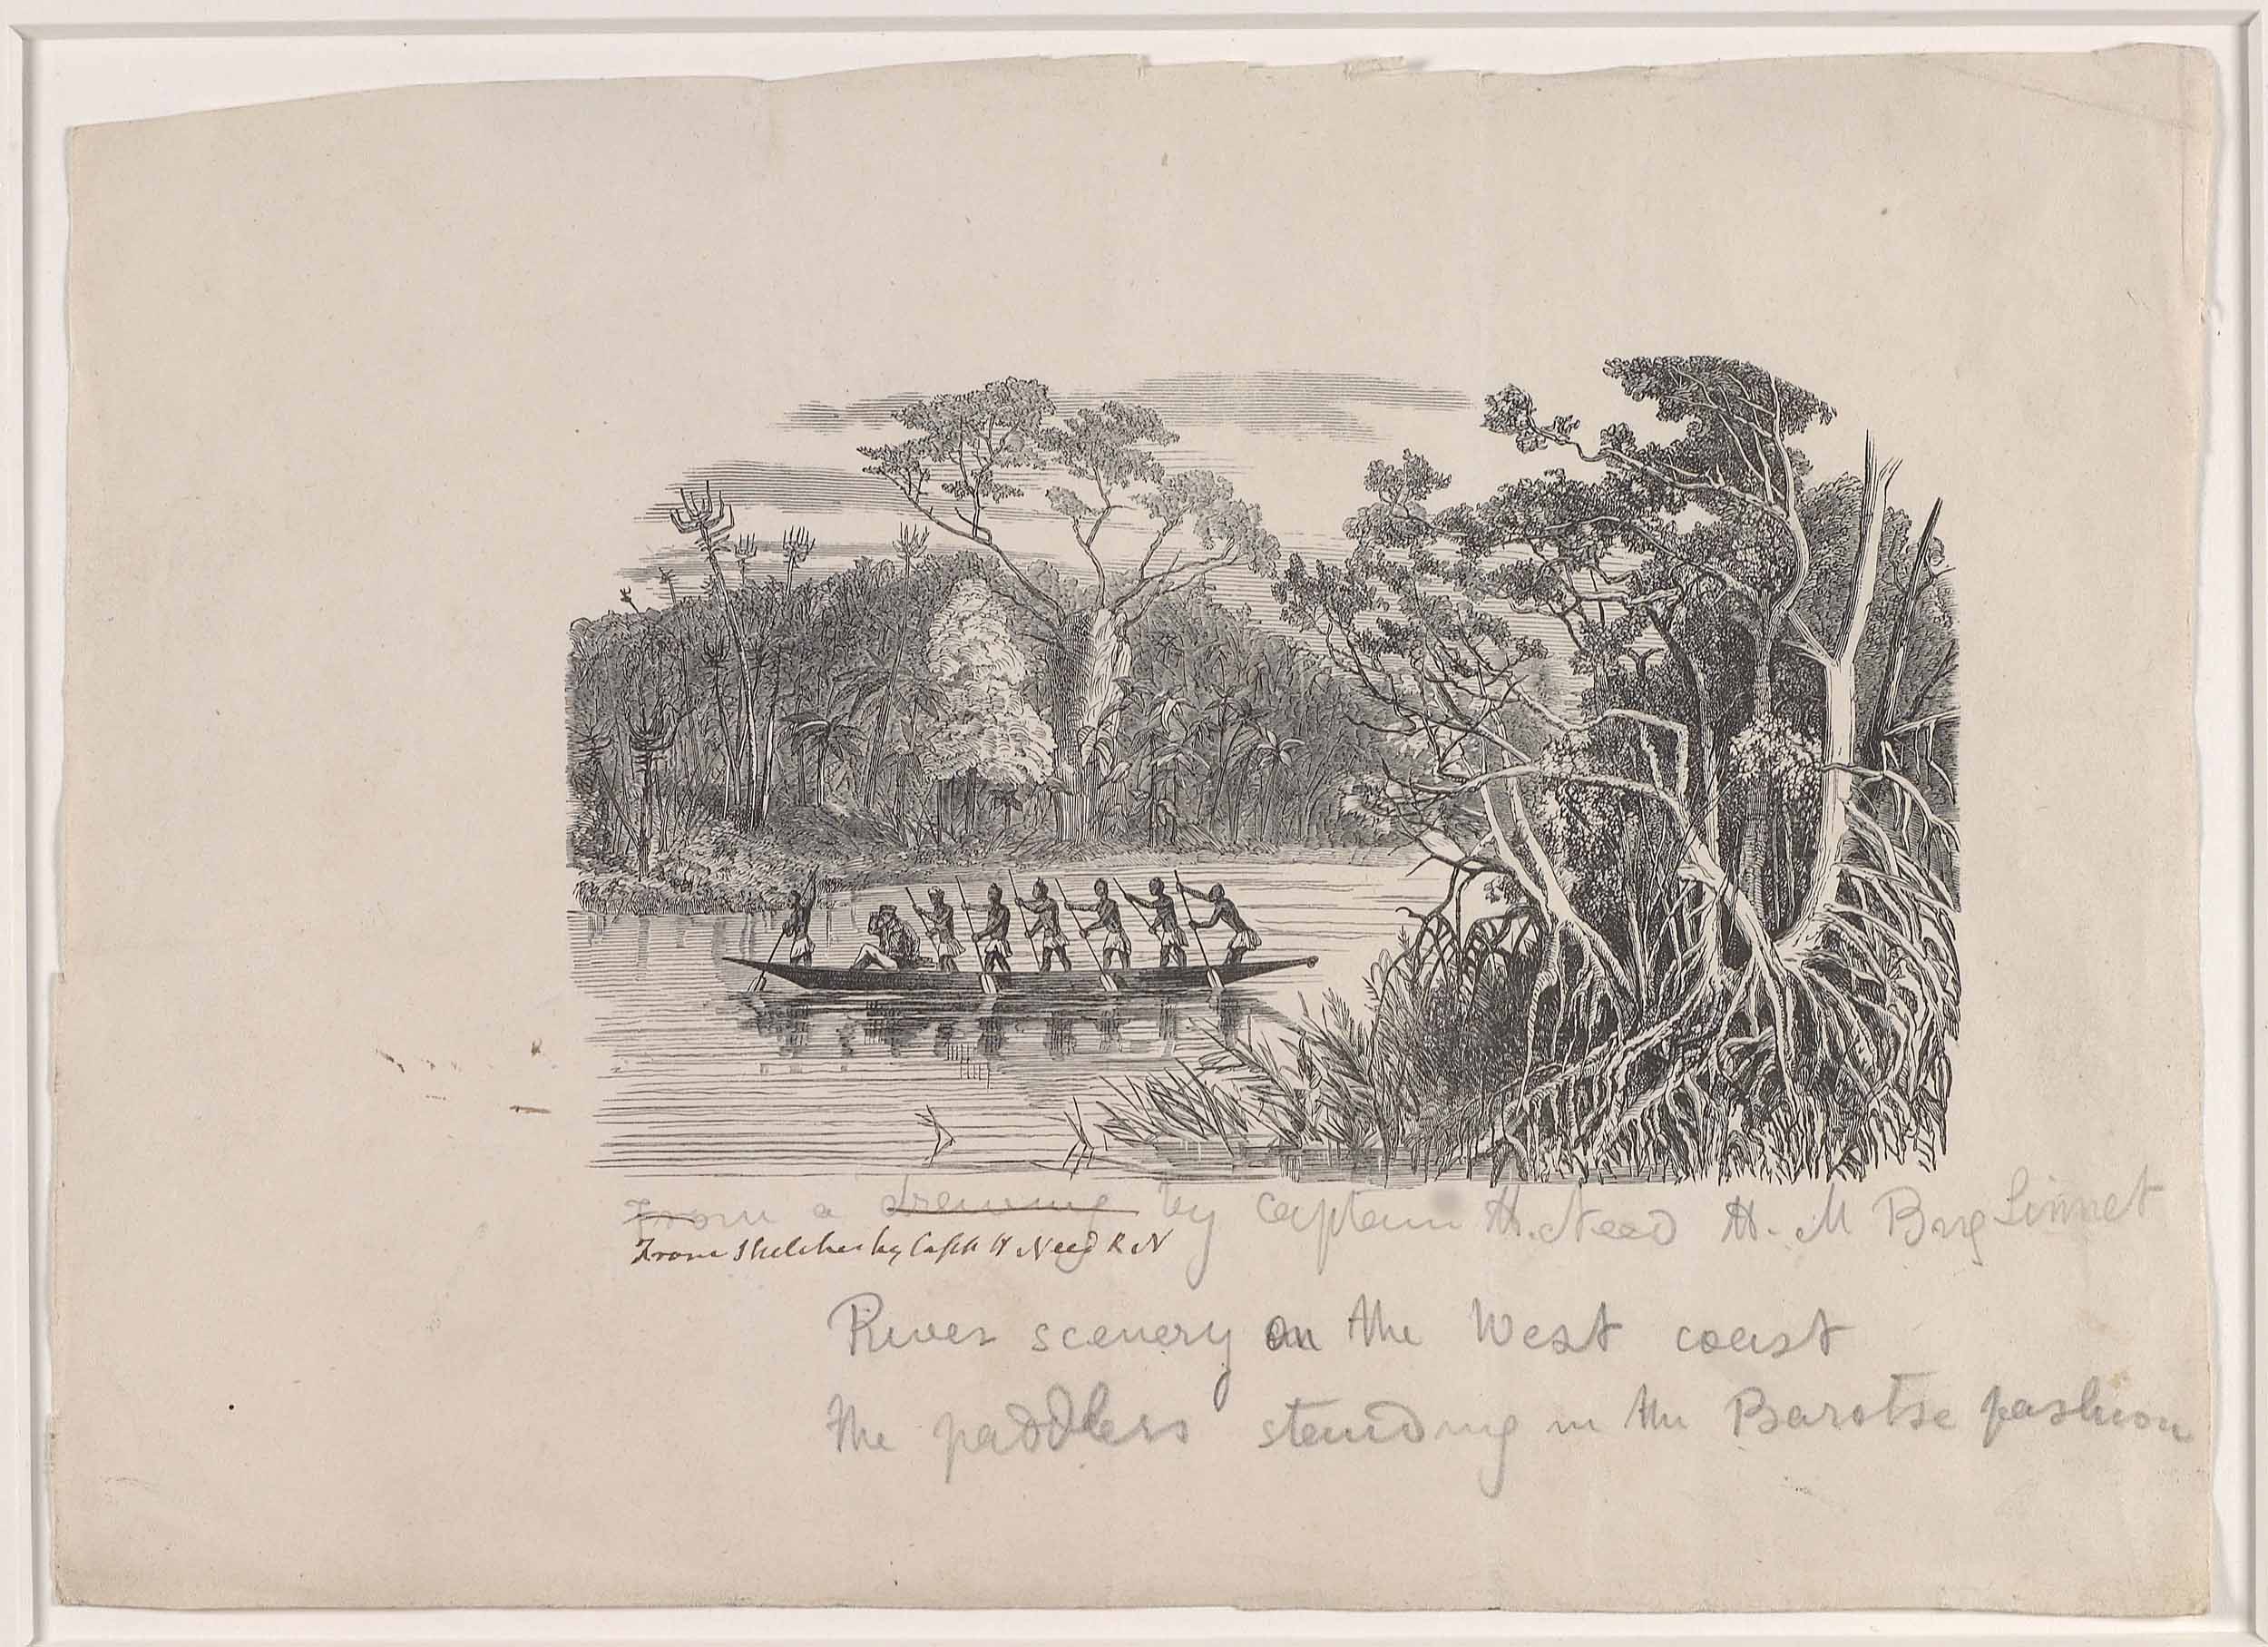 David Livingstone, River scenery on the west coast (Annotated Proof), c.1856-1857. Copyright National Library of Scotland. Creative Commons Share-alike 2.5 UK: Scotland(https://creativecommons.org/licenses/by-nc-sa/2.5/scotland/).